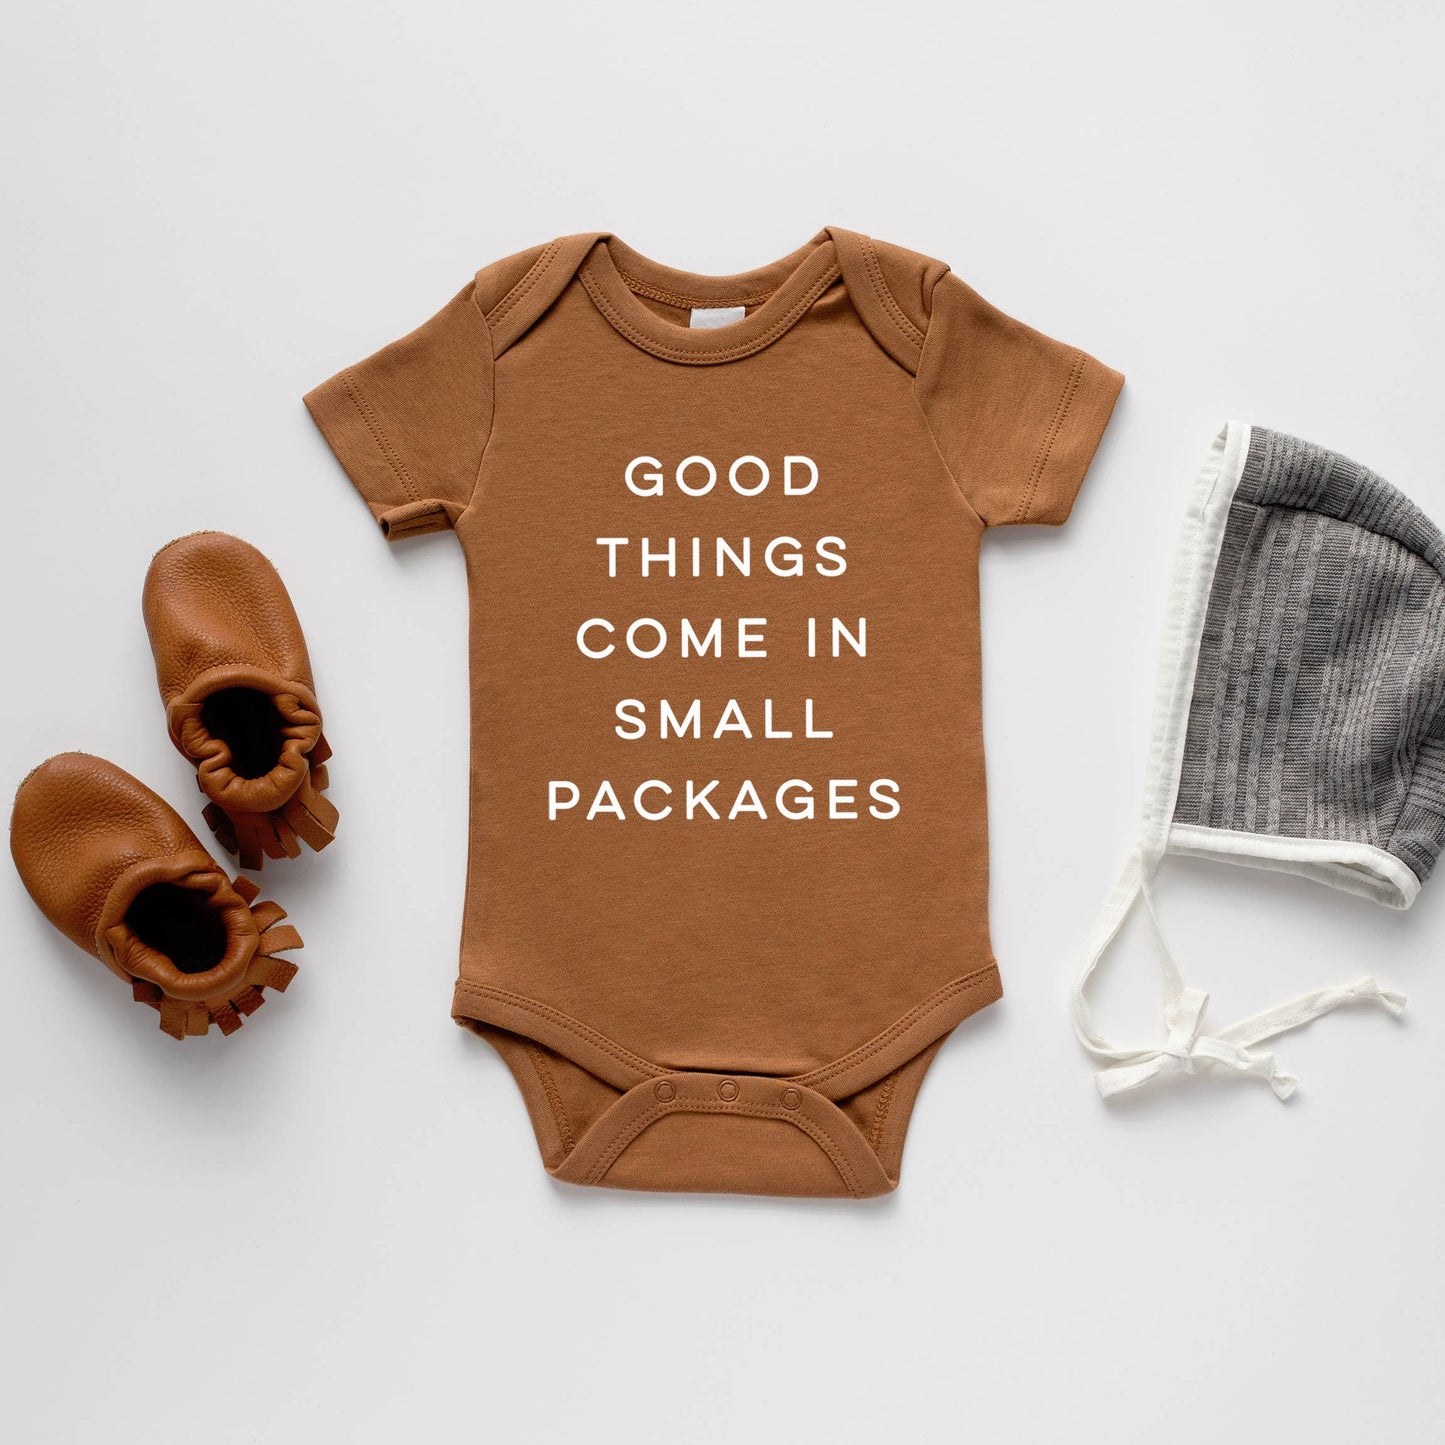 "Good Things Come In Small Packages" Organic Cotton Bodysuit